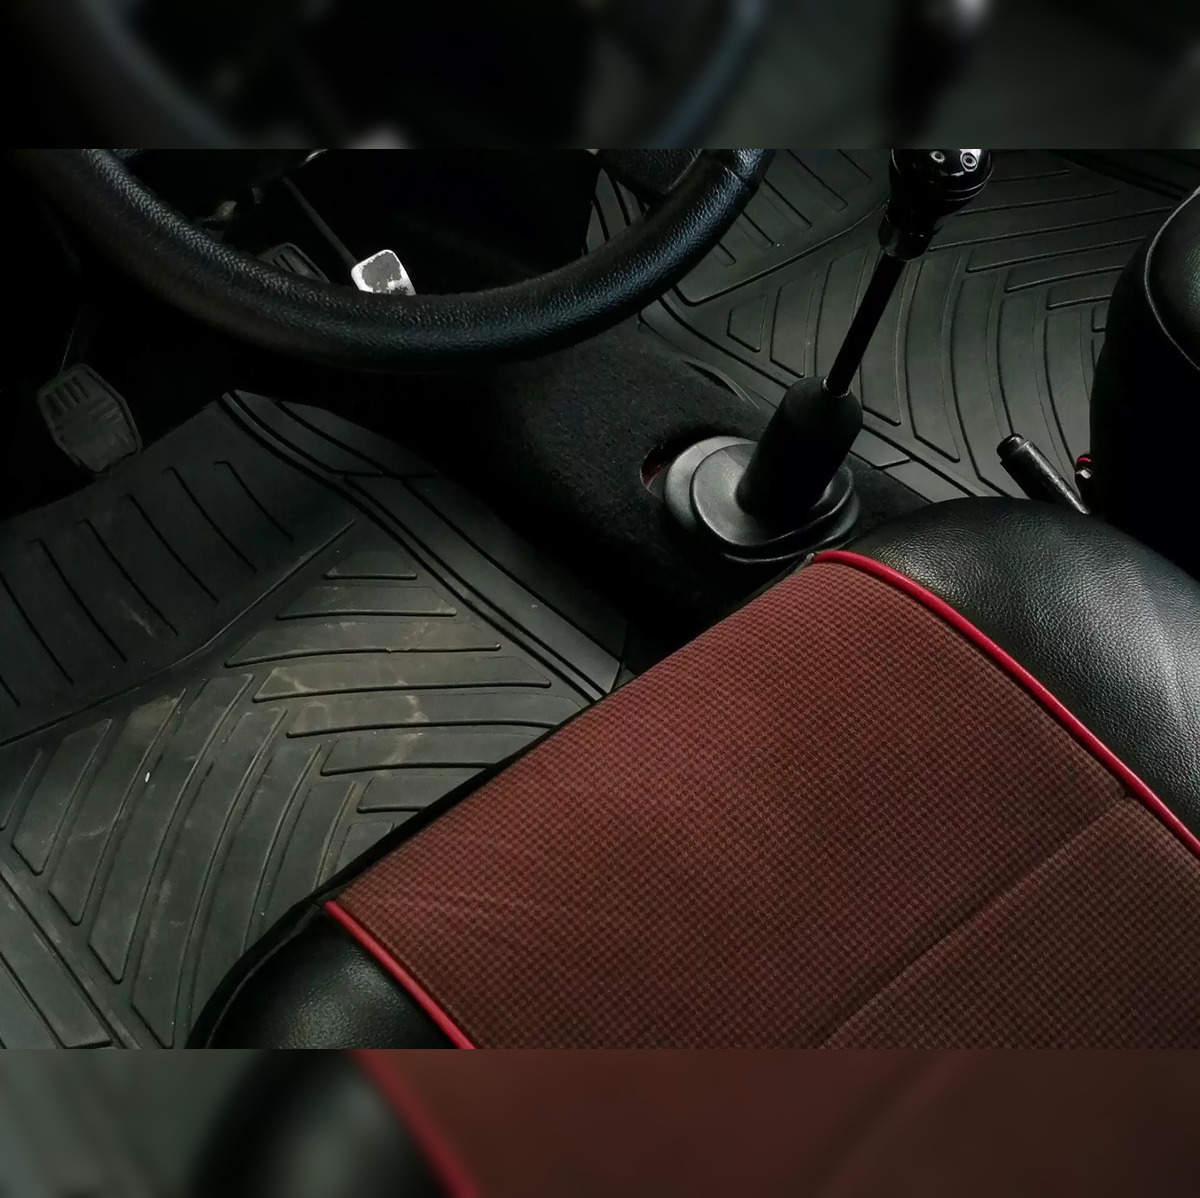 DIY Ultra Waterproof Trimmable Car Floor Mats for all Cars, Trucks